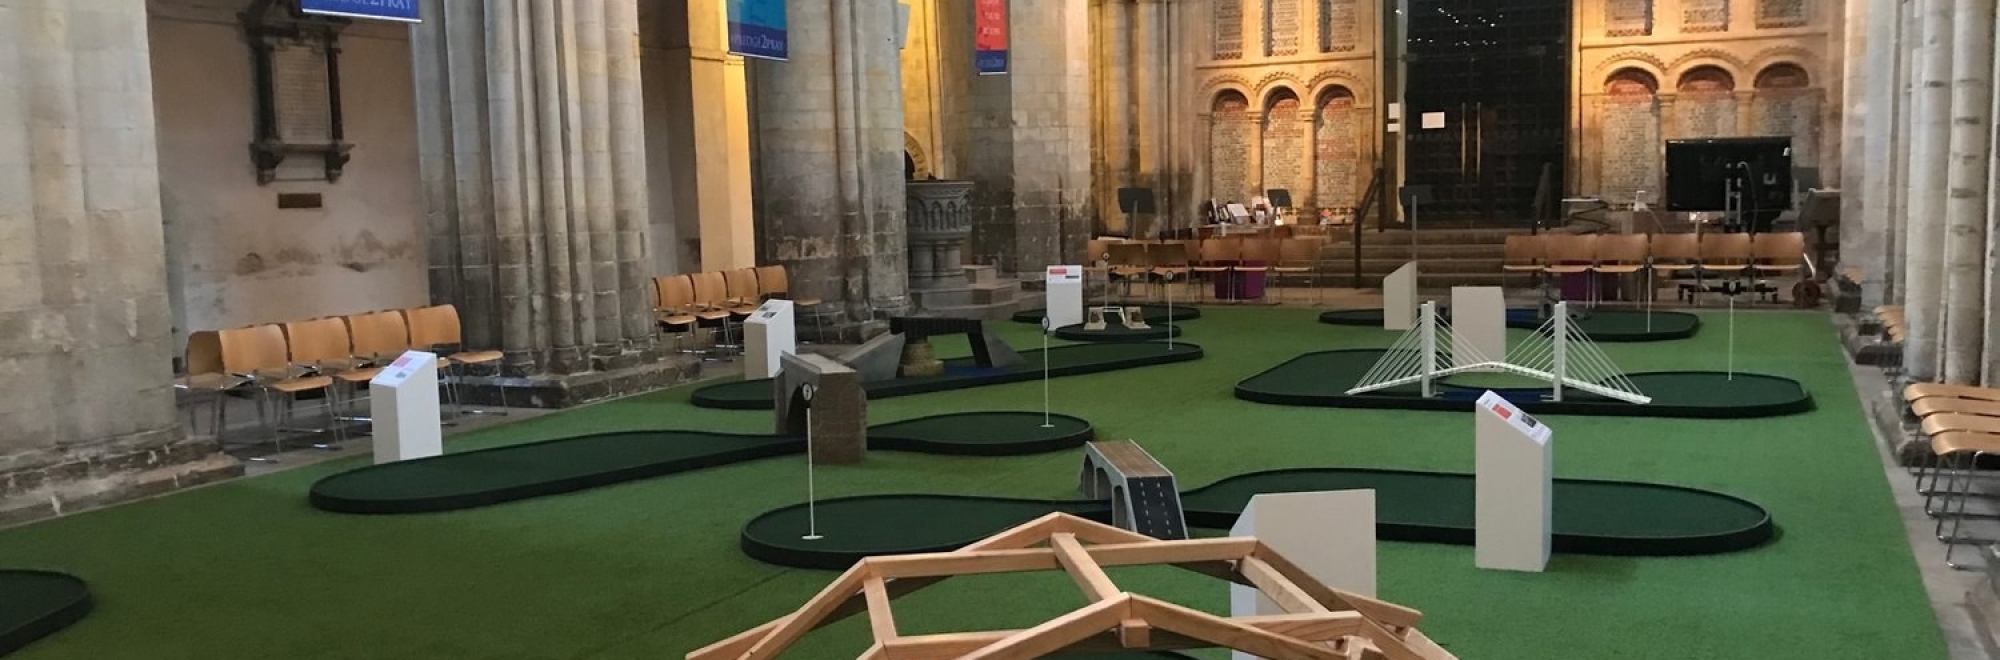 Prayers and Putting: Rochester Cathedral's 'Fairway to heaven' brings families through its doors